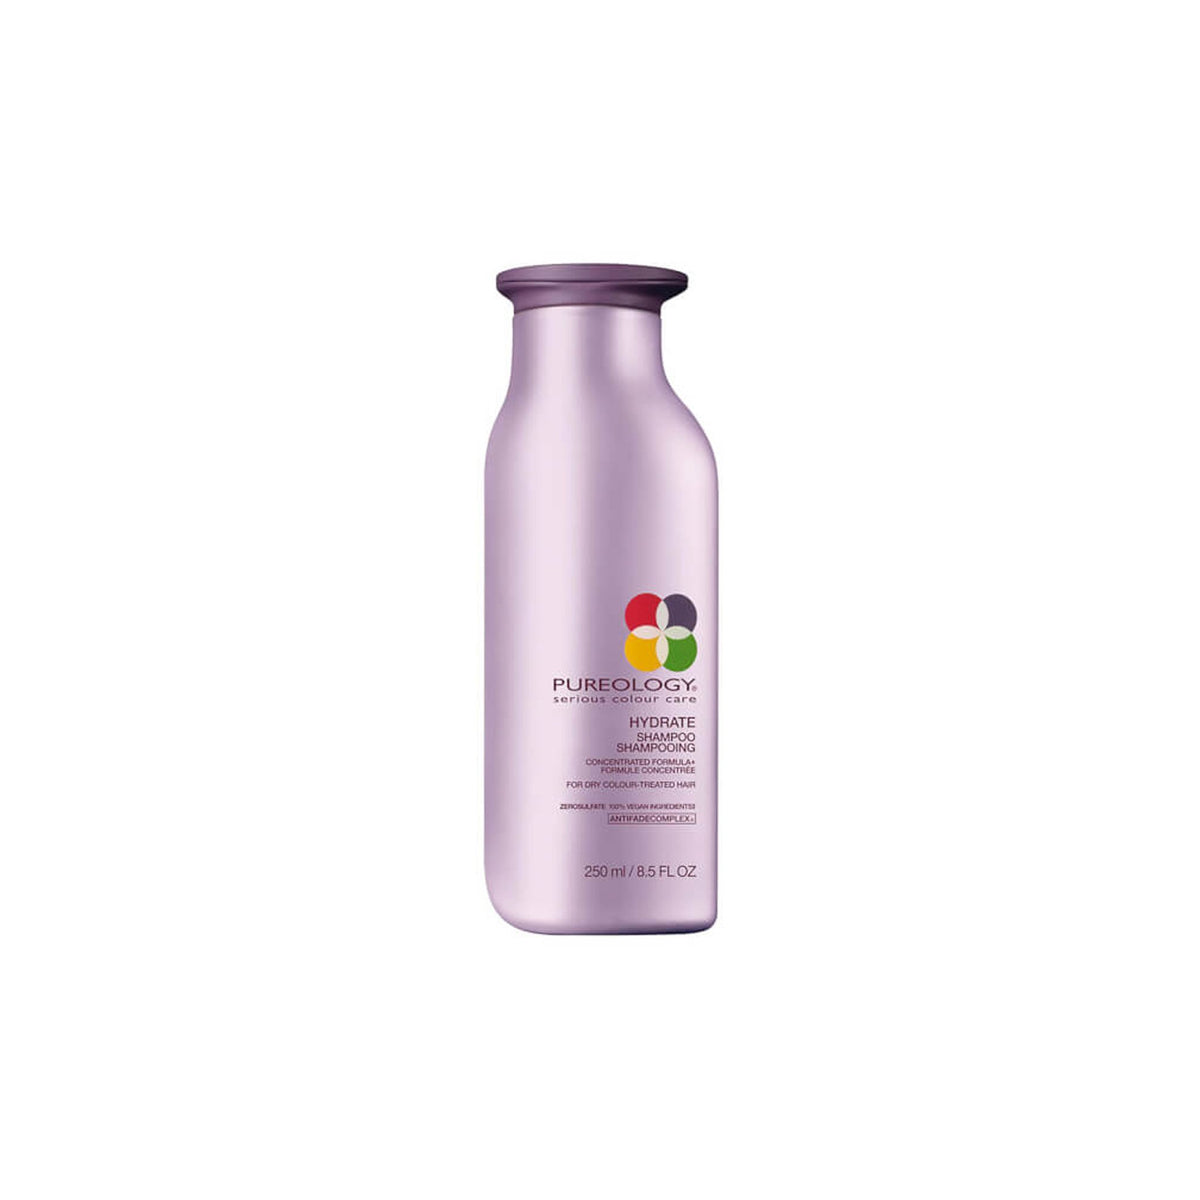 Pureology Serious Colour Care Smooth Perfection Shampoo 250ml